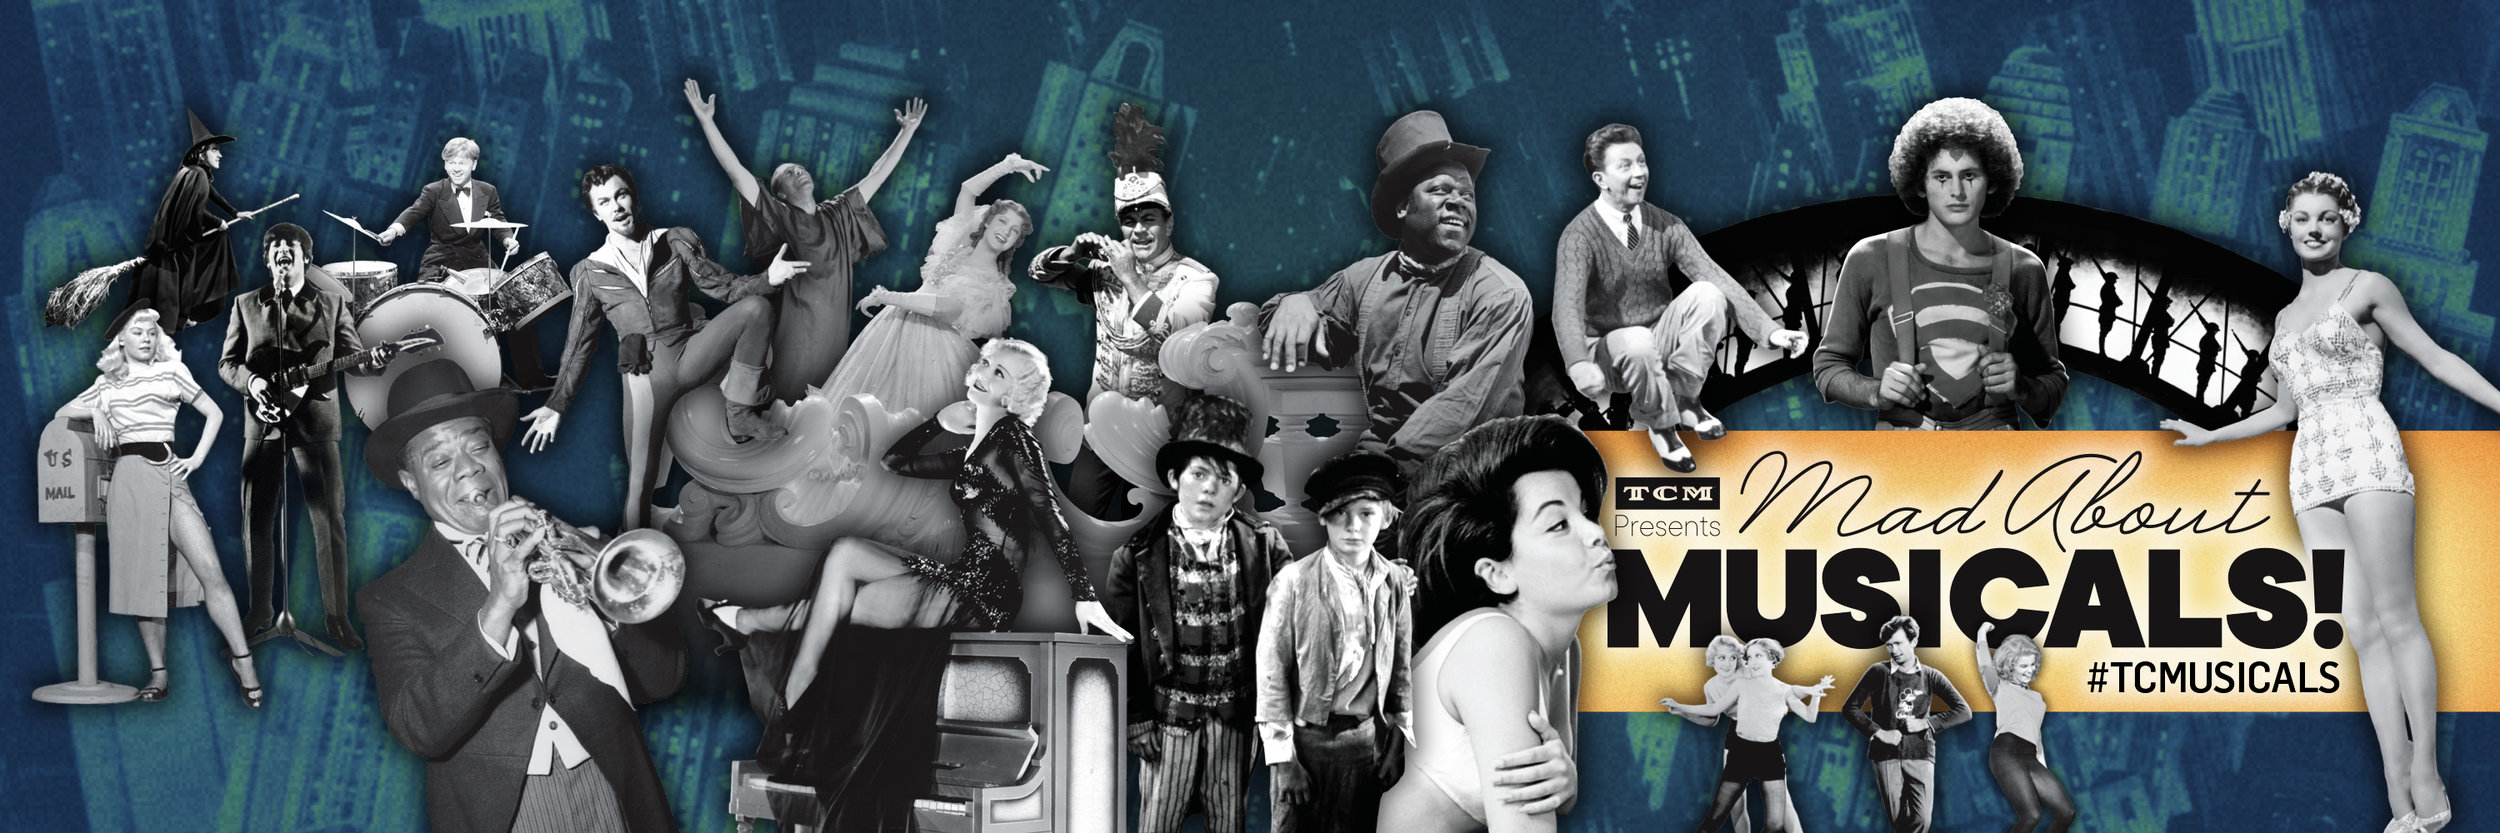 TCM_SocialCovers_18-06_MadAboutMusicals_Concepts_RD3-B.jpg